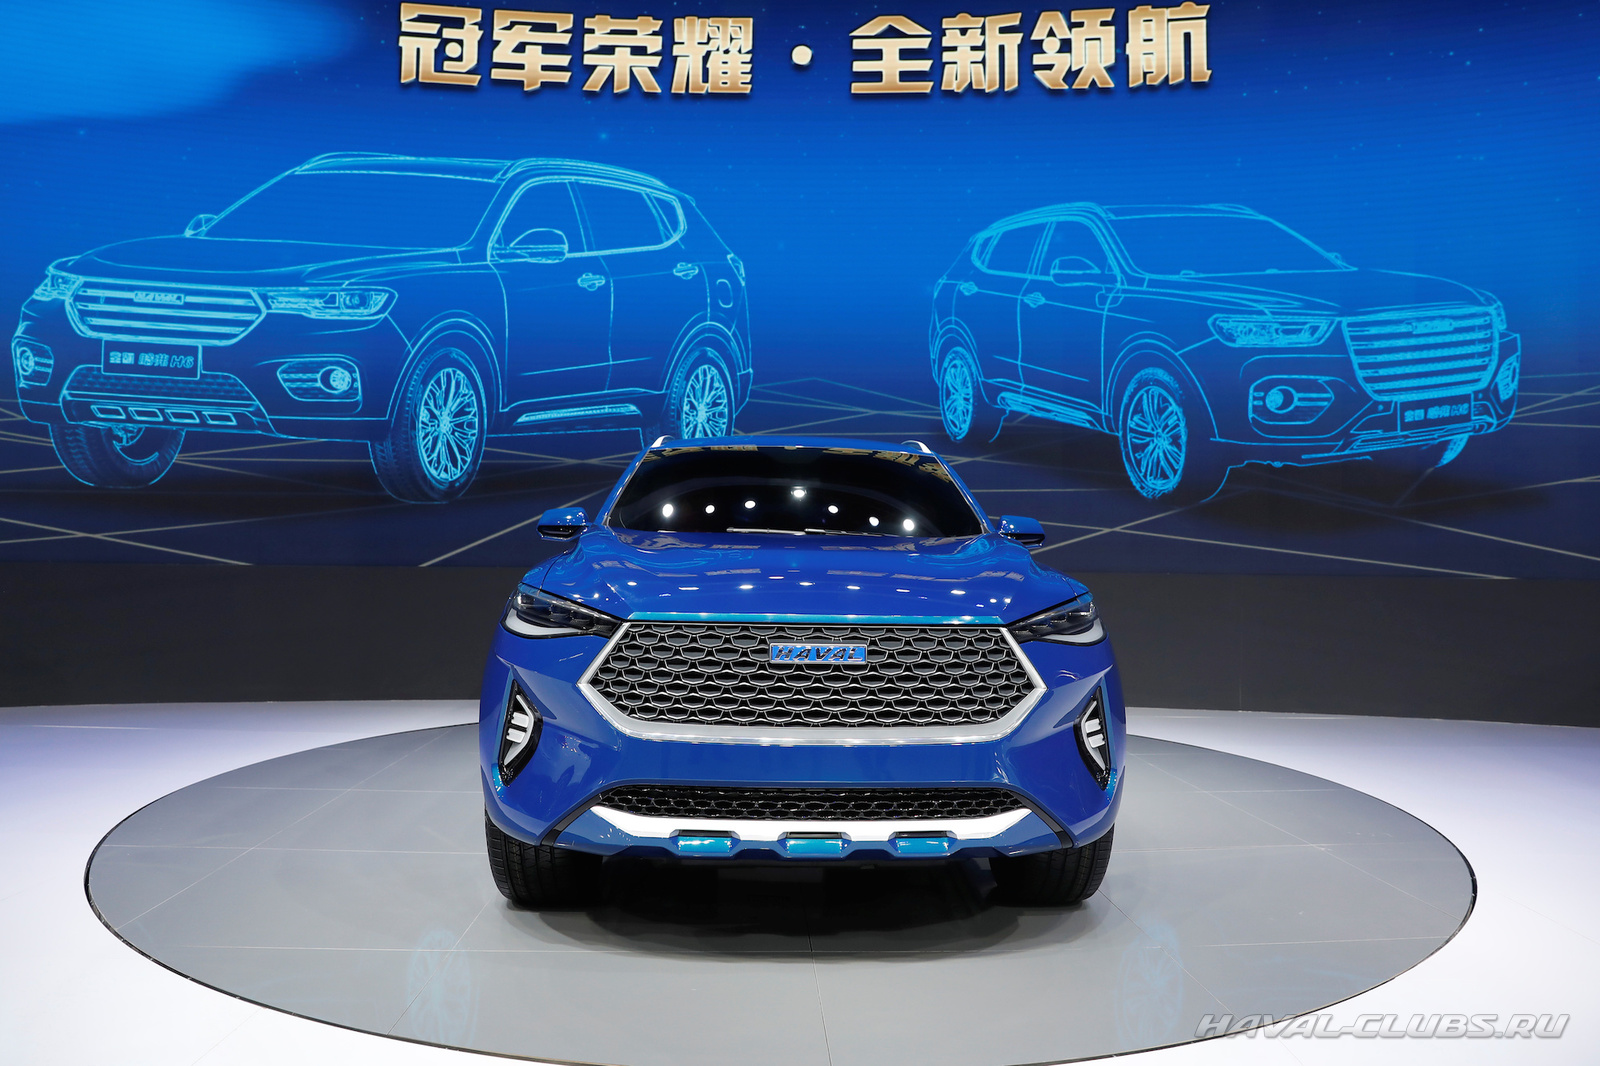 at-this-years-show-it-is-all-about-the-new-suv-concepts-and-production-vehicles-from-chinas-many-dom--brands-some-of-the-highlights-include-this-hb03-hybrid-and.jpg